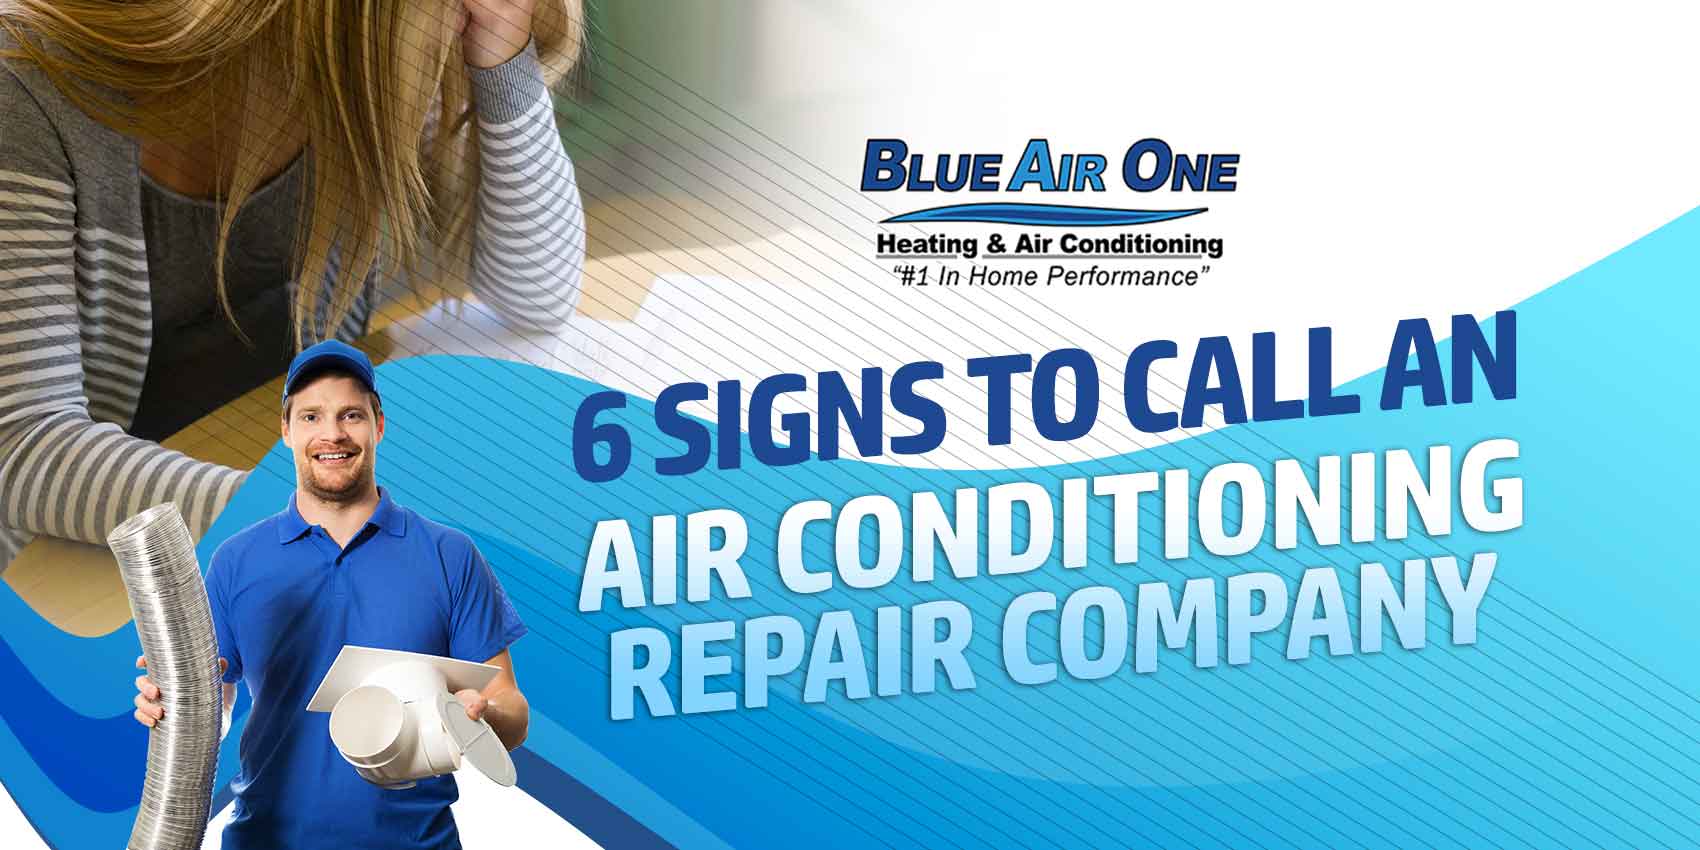 6 Signs to Call an Air Conditioning Repair Company